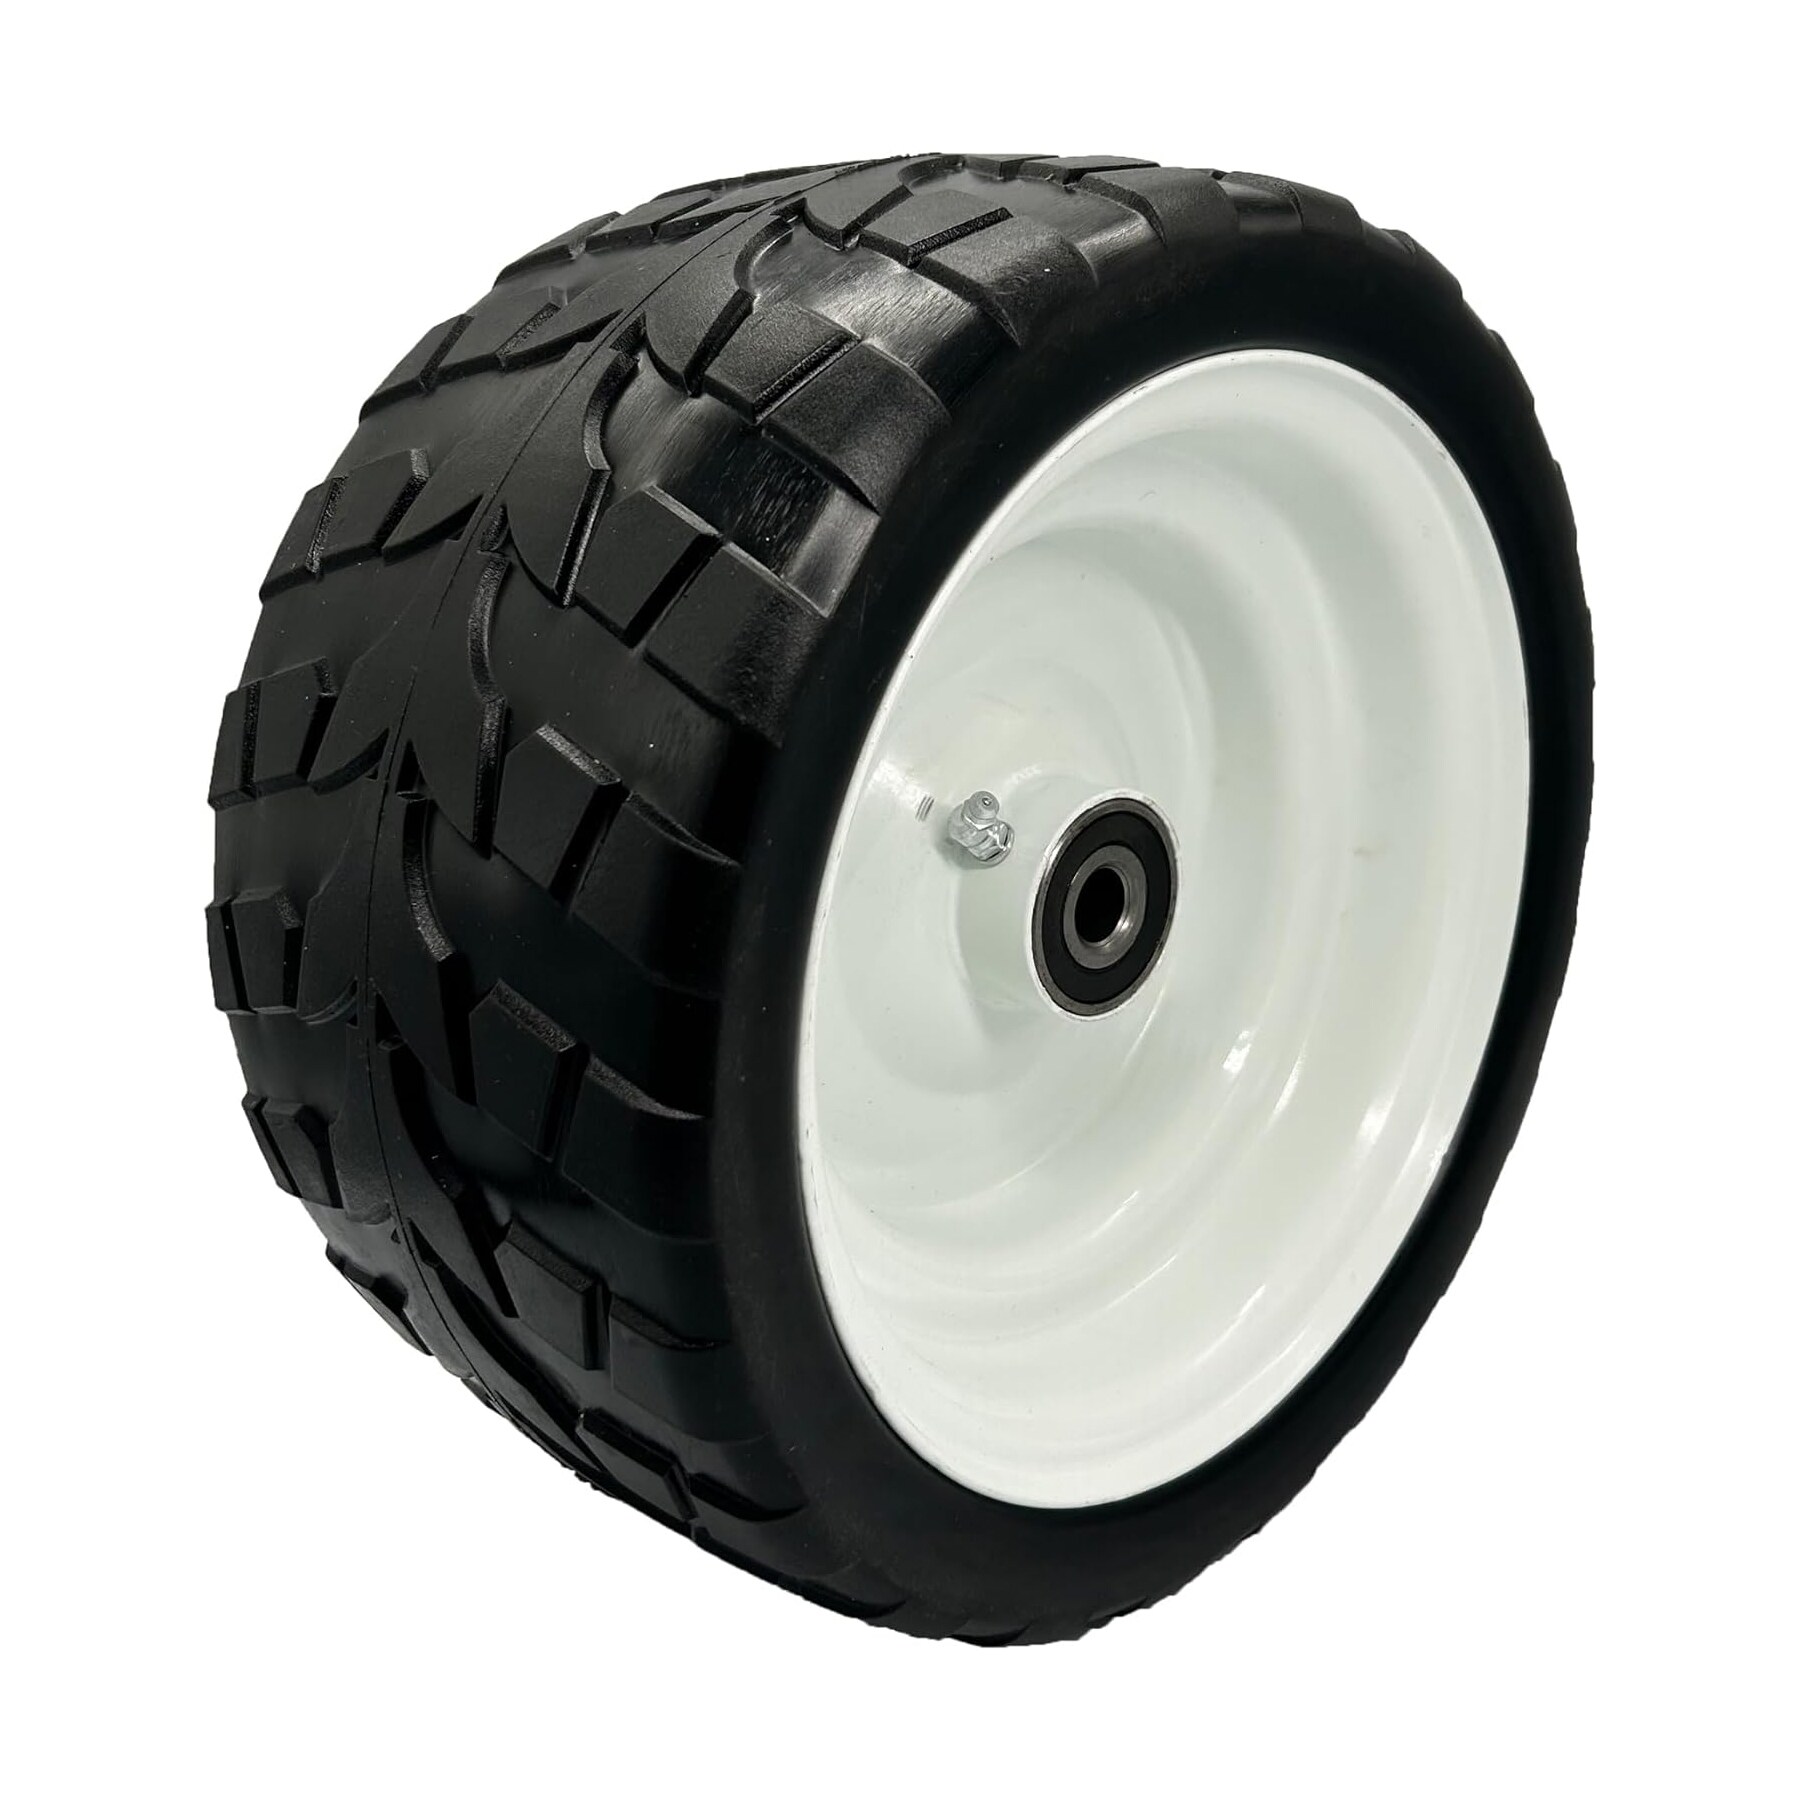 Ogracwheel 12x6-6 Flat Free Lawn Mower Tire with 3/4 and 5/8